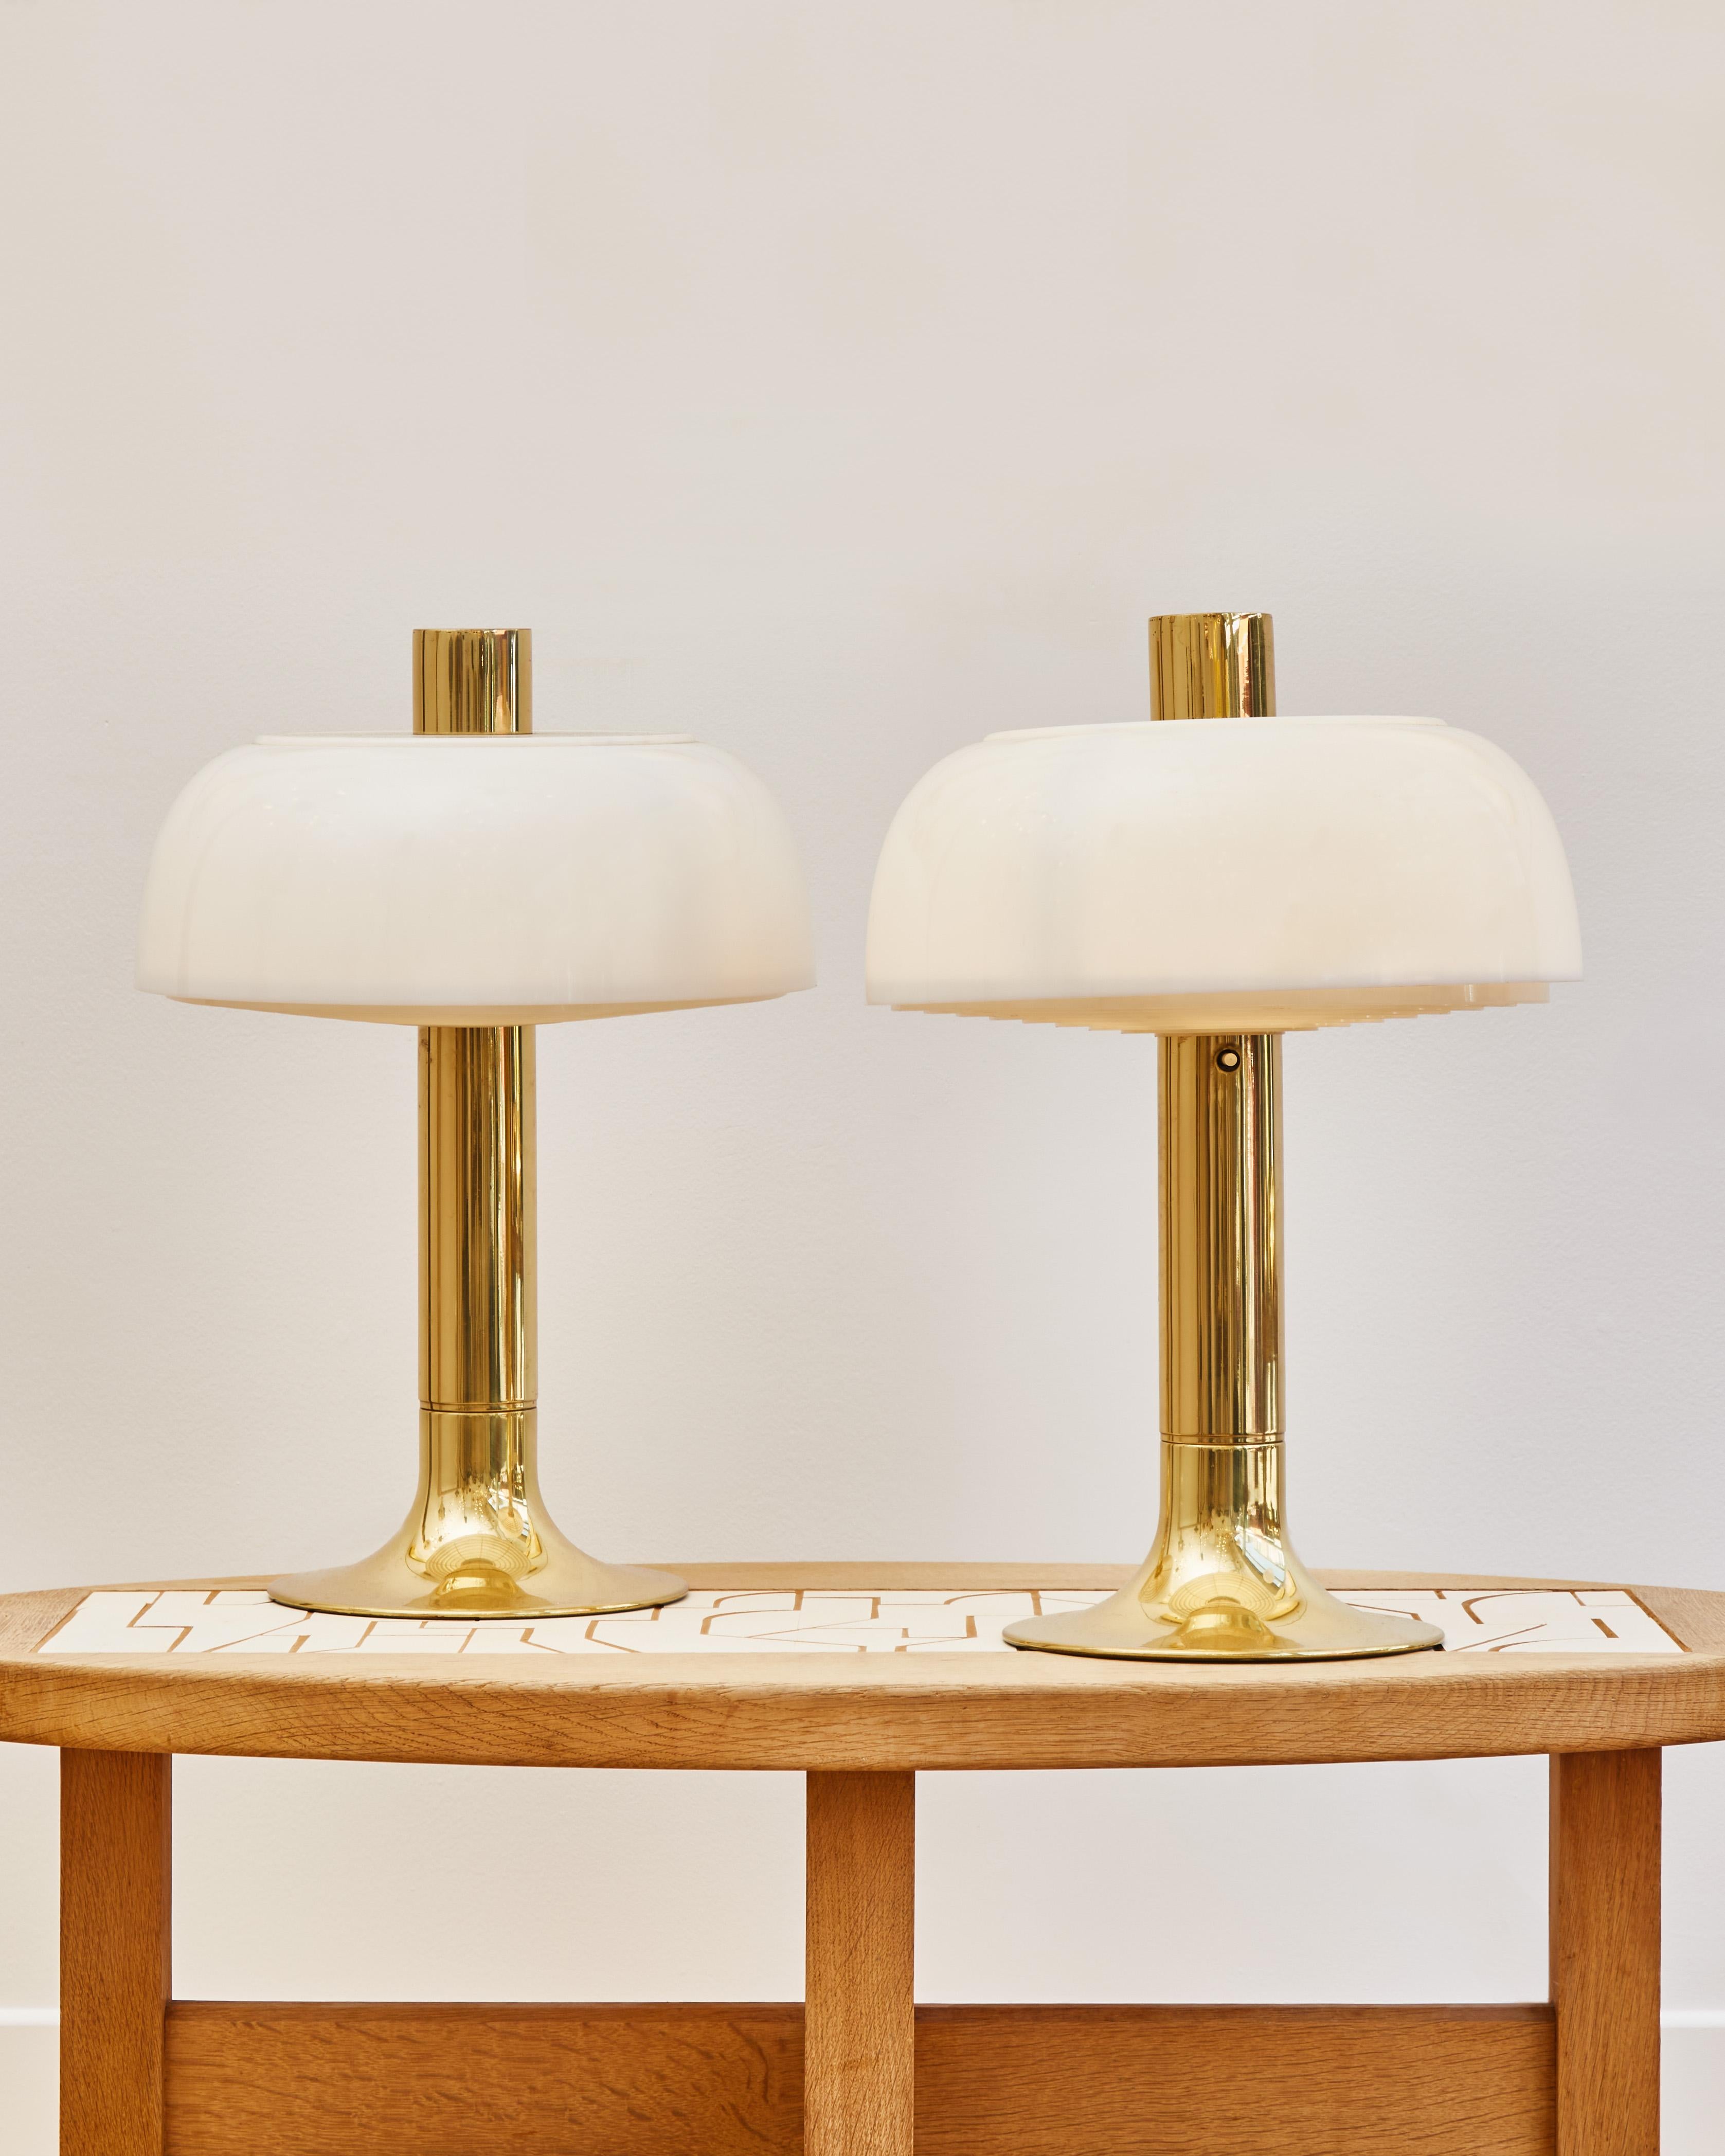 Pair of table lamps designed by the Swedish designer Hans Agne Jakobsson in the 1950s, model B205 (original stamp under the foot). Each lamp is made of a brass structure and a surprisingly decorative two-part shade with the curved top and multiple